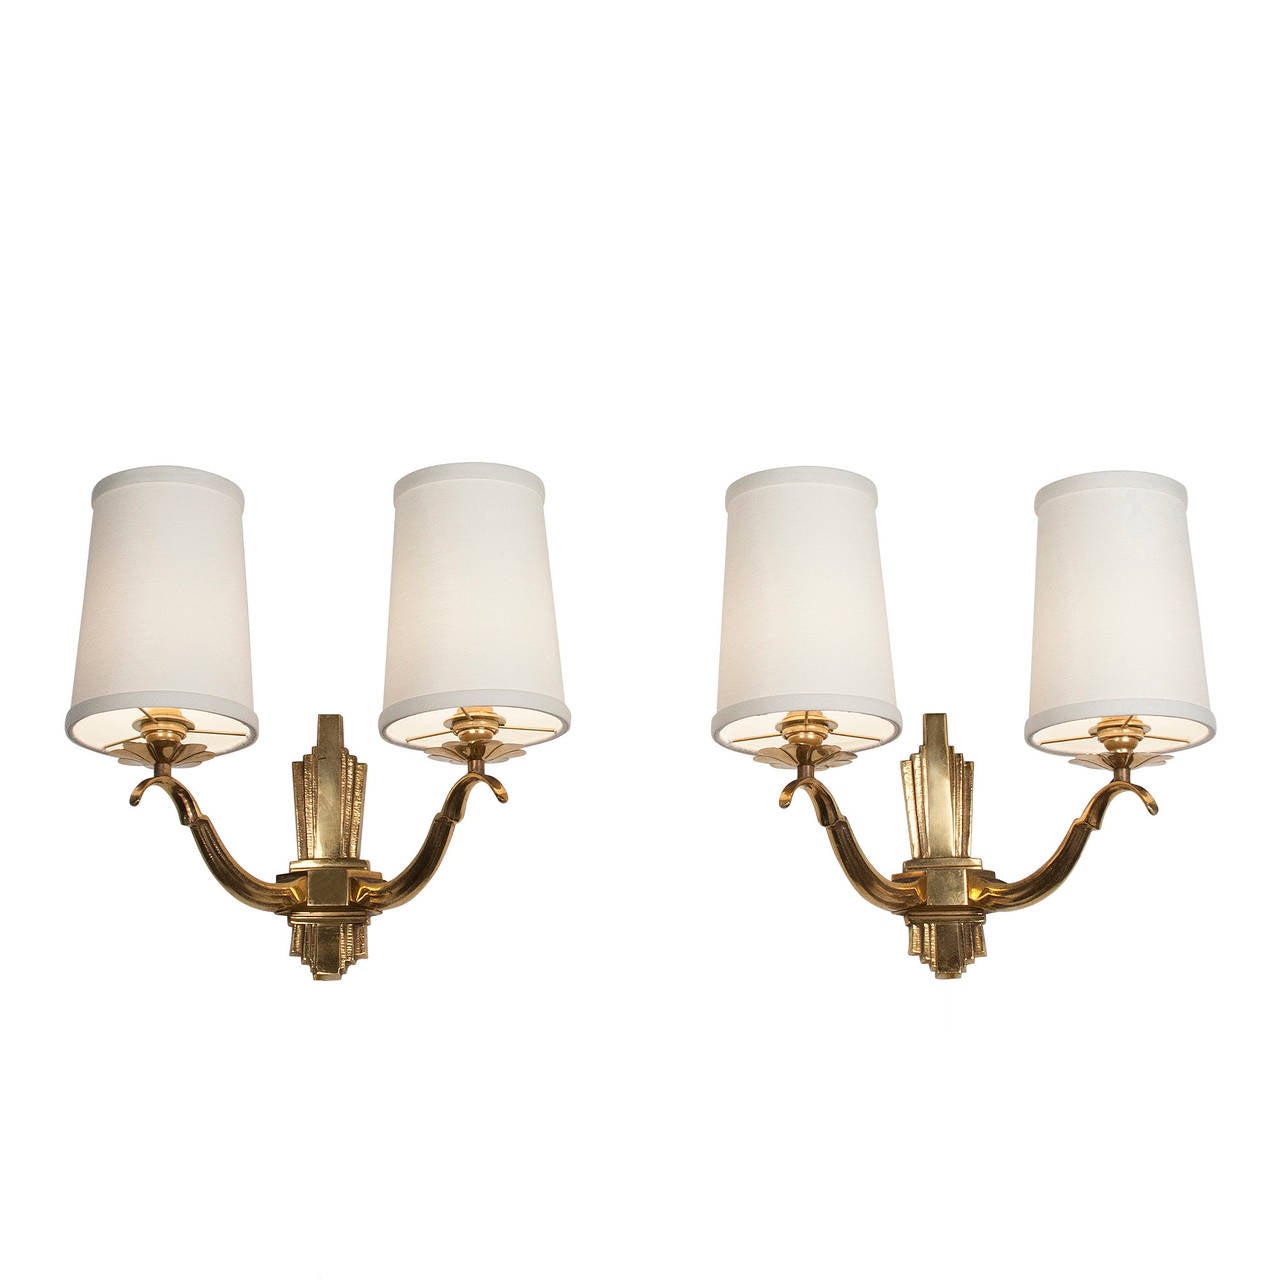 Pair of two-arm bronze sconces, curved S-shaped arms joining at center stepped shield wall mount, French, 1940s. In custom silk shades, height 13 1/2 in, width 14 in, depth 7 3/4 in. Shade measures top diameter 4 in, bottom diameter 5 in, height 6